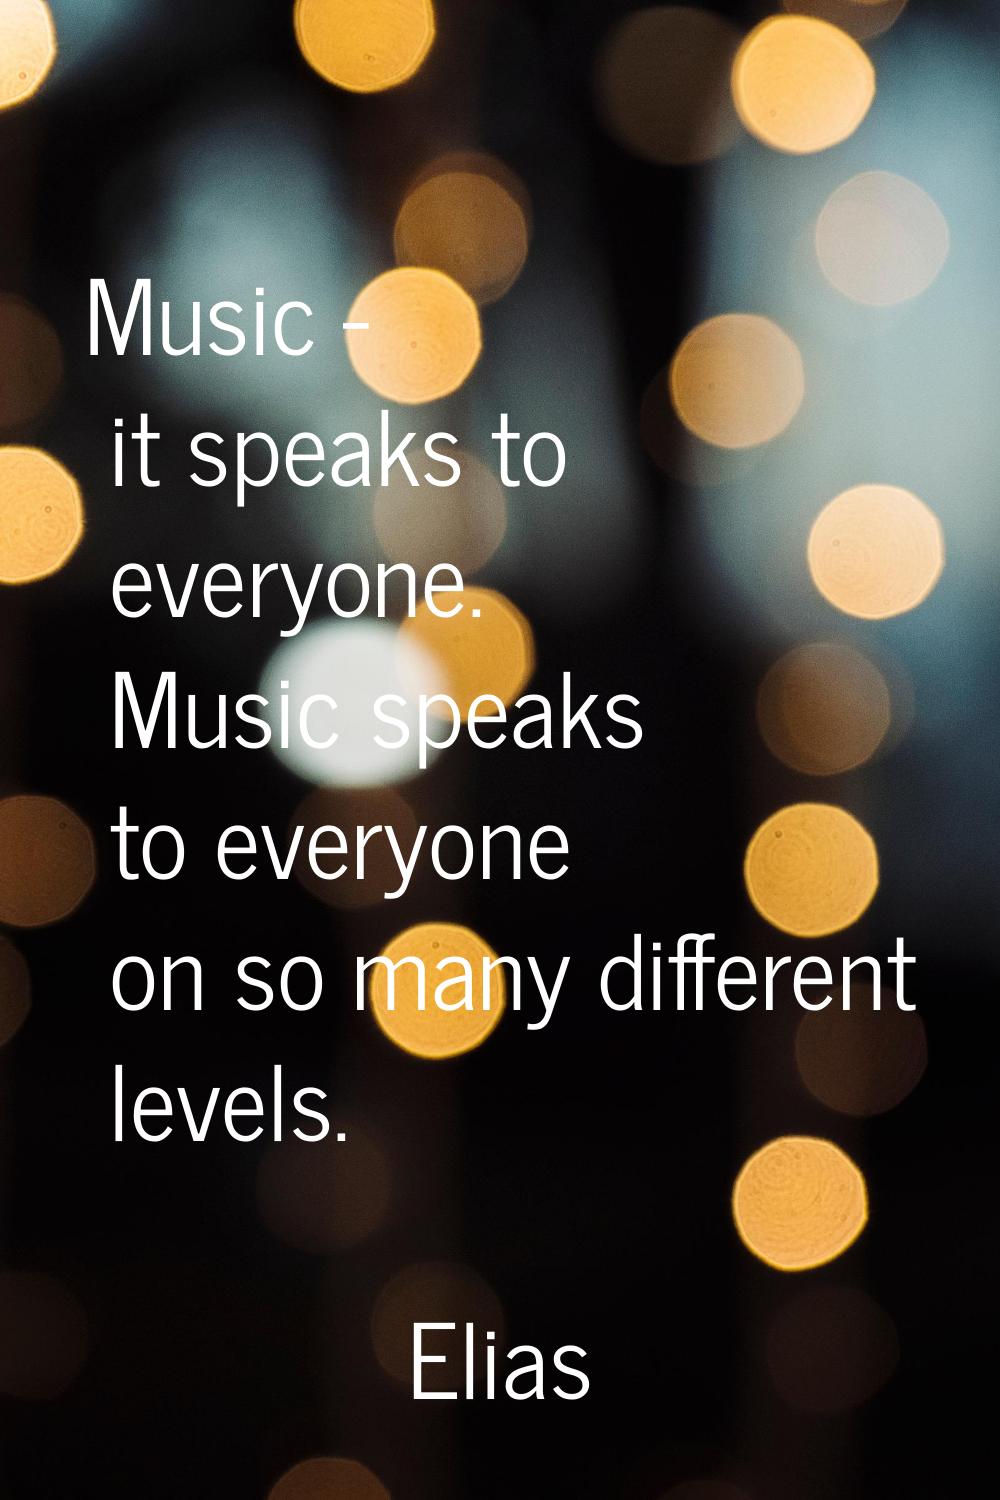 Music - it speaks to everyone. Music speaks to everyone on so many different levels.